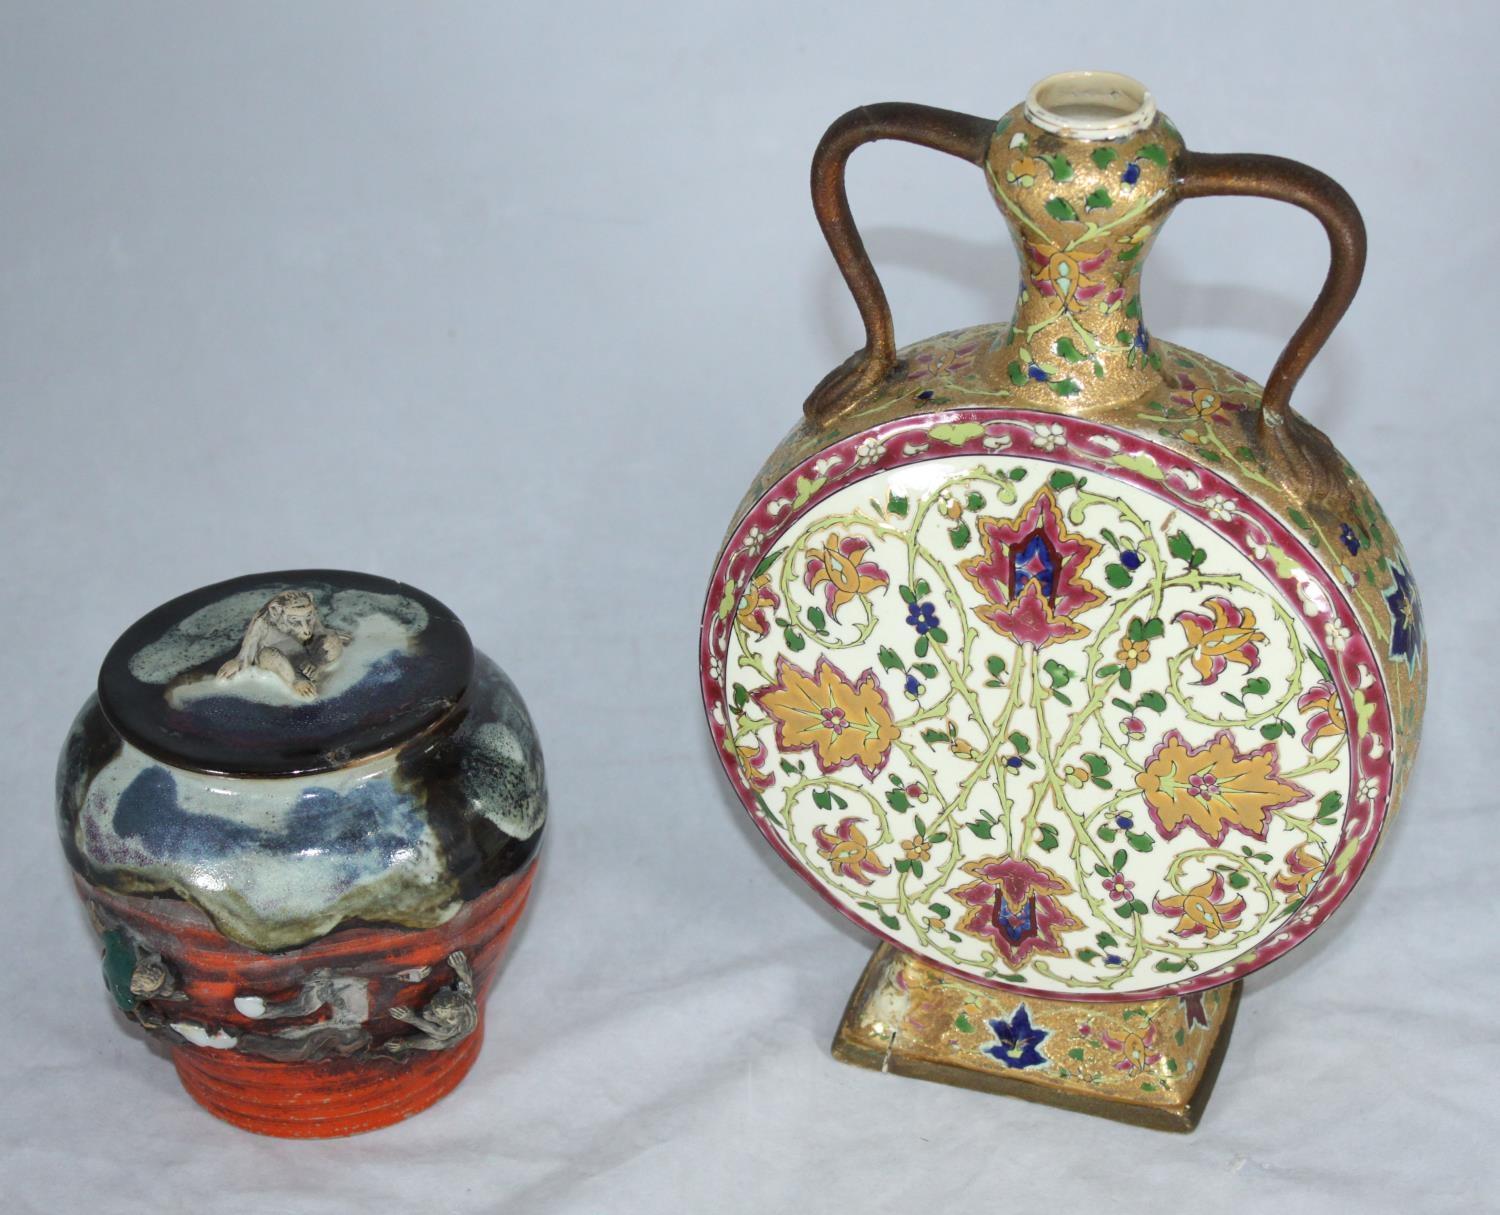 An antique Japanese Sumida Gawa Pottery lidded jar and cover, the sides decorated with moulded